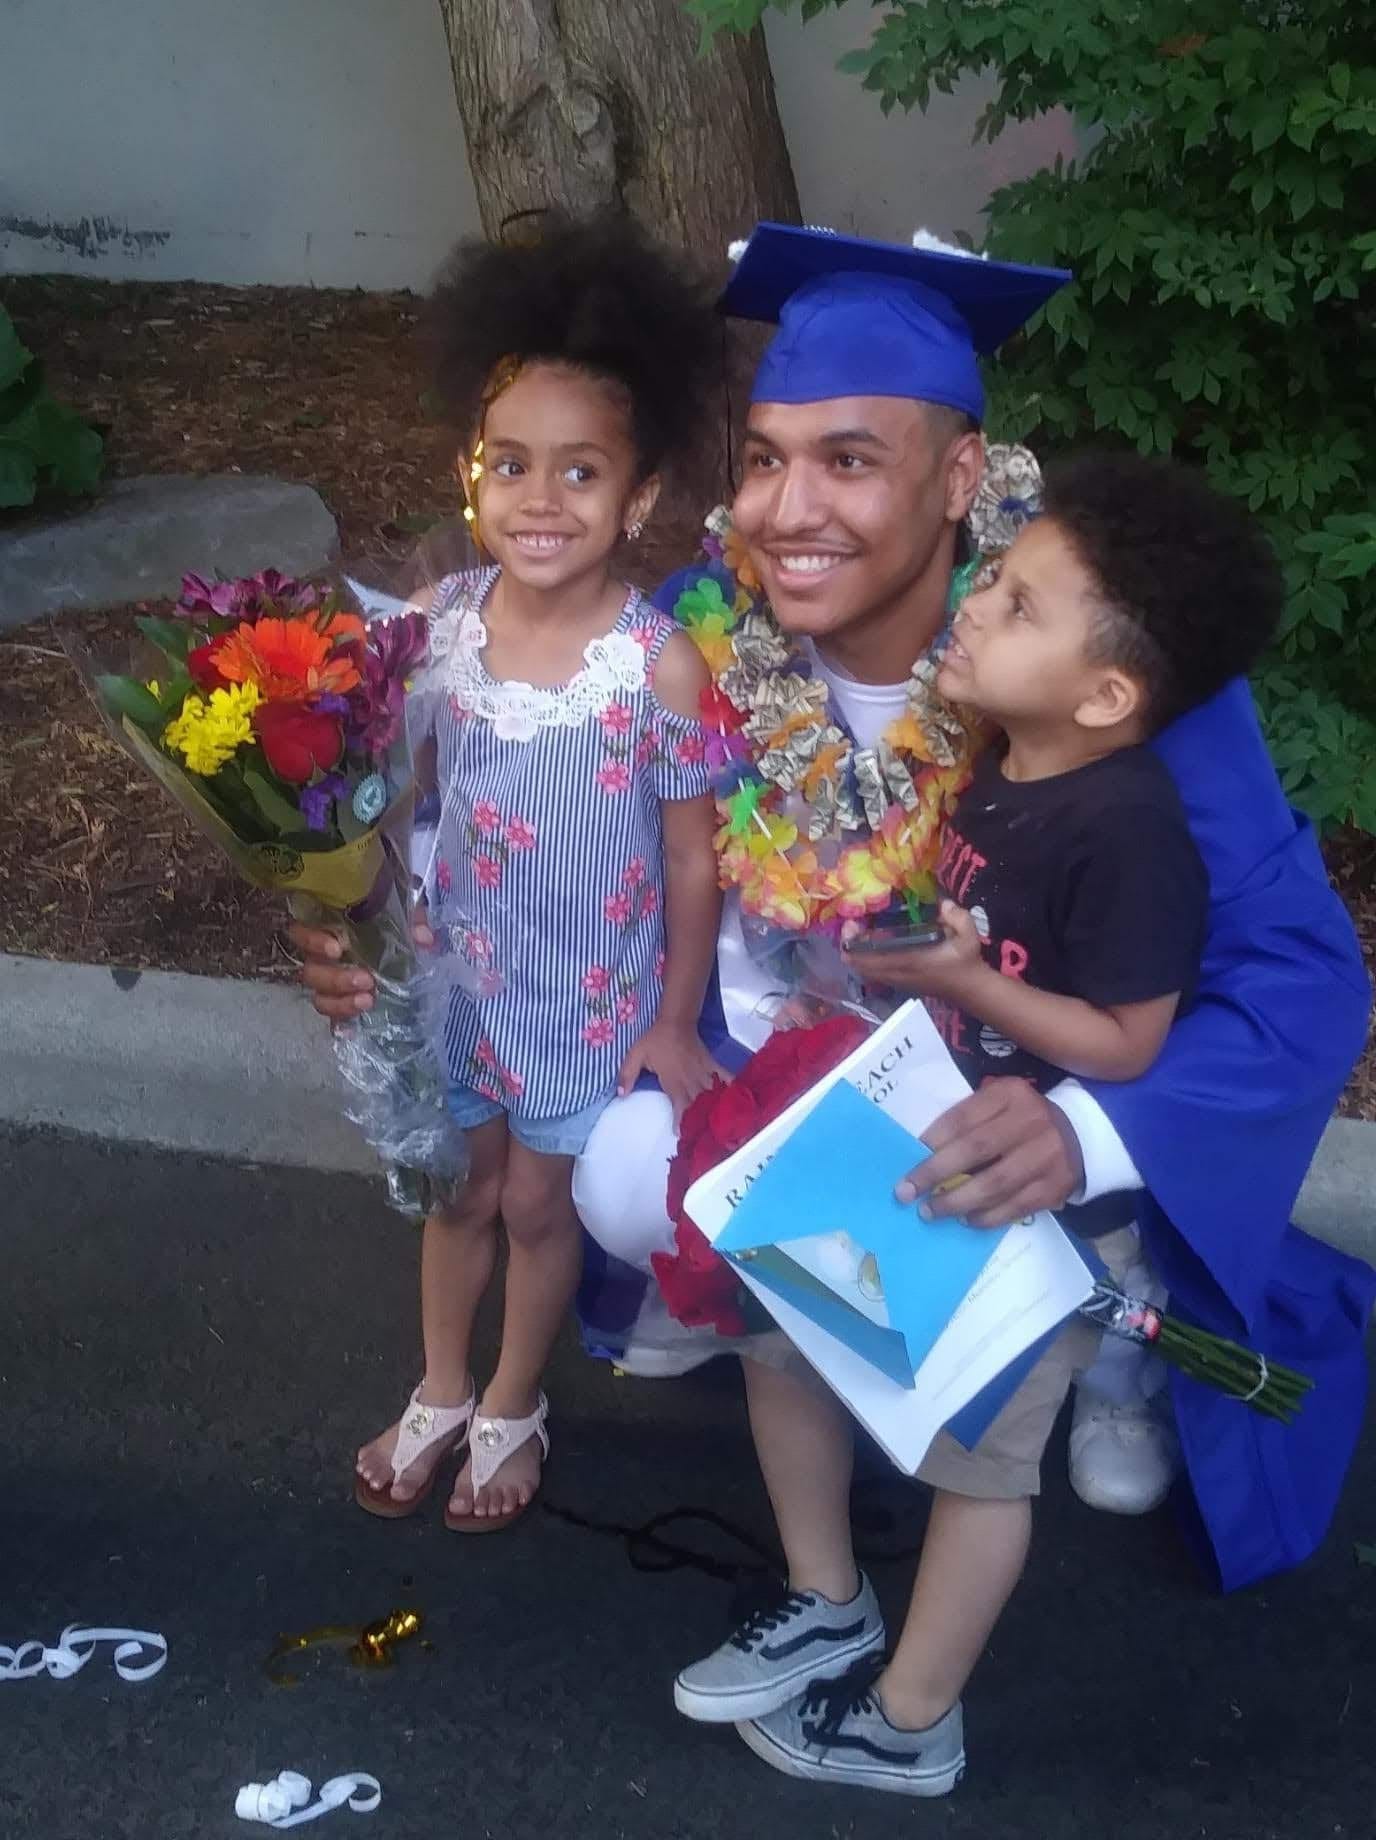 Elijah Lewis with the niece and nephew who became pillars of his world, and students of his activism.